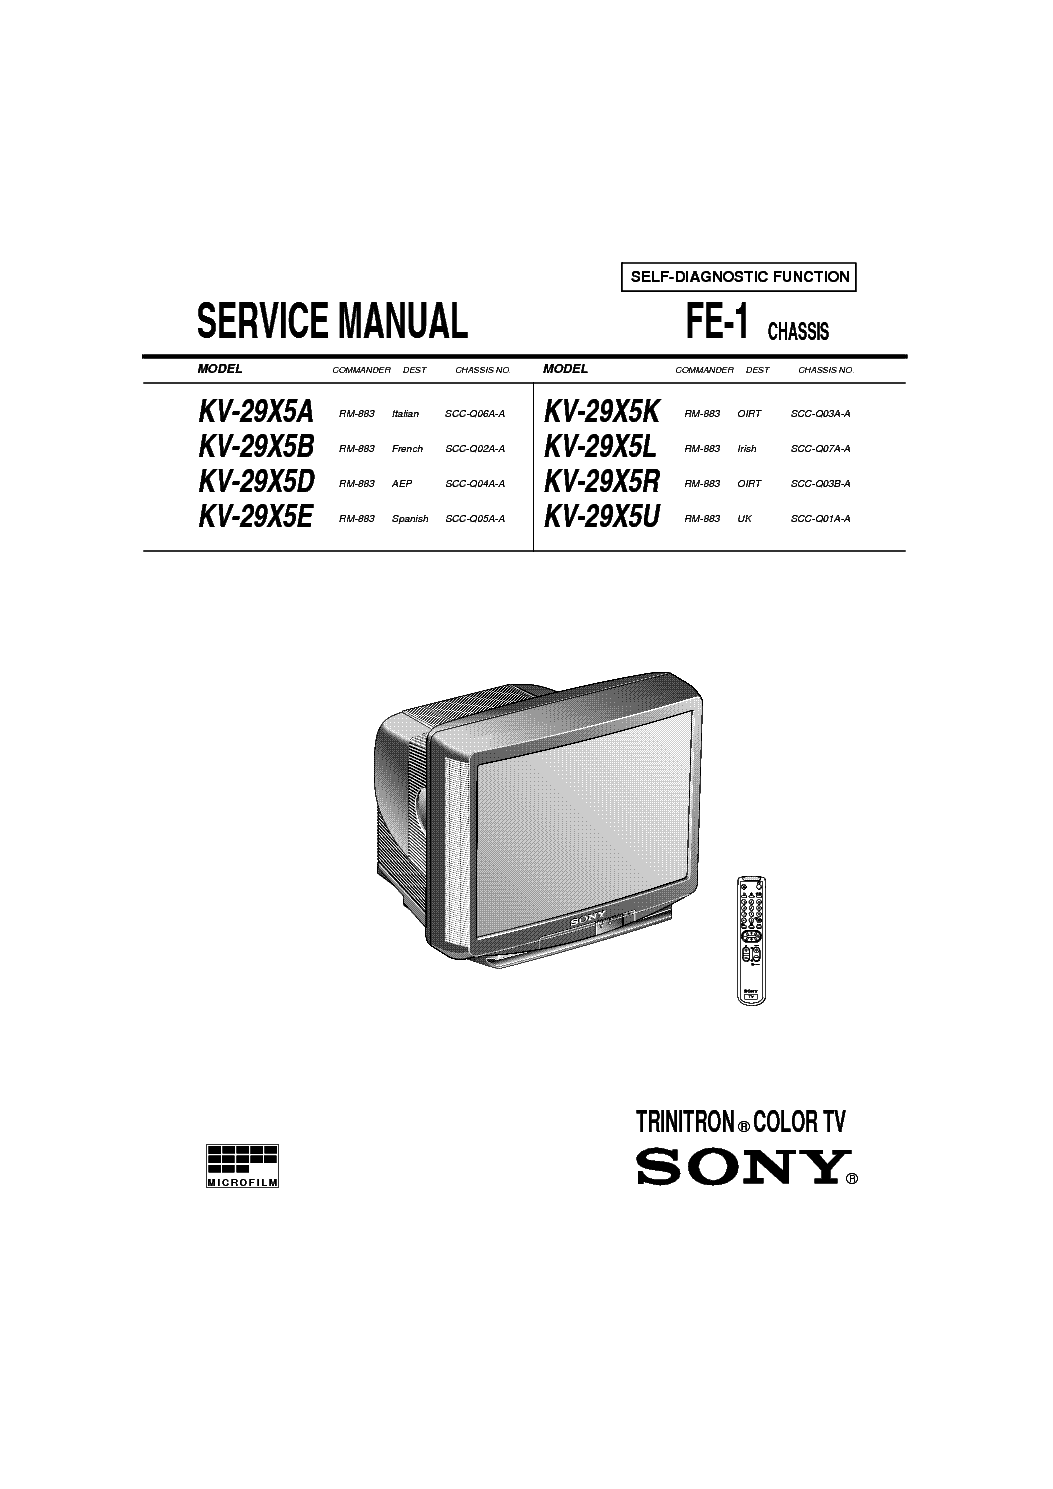 SONY KV-29X5A B D E K L R U CHASSIS FE-1 SM service manual (1st page)